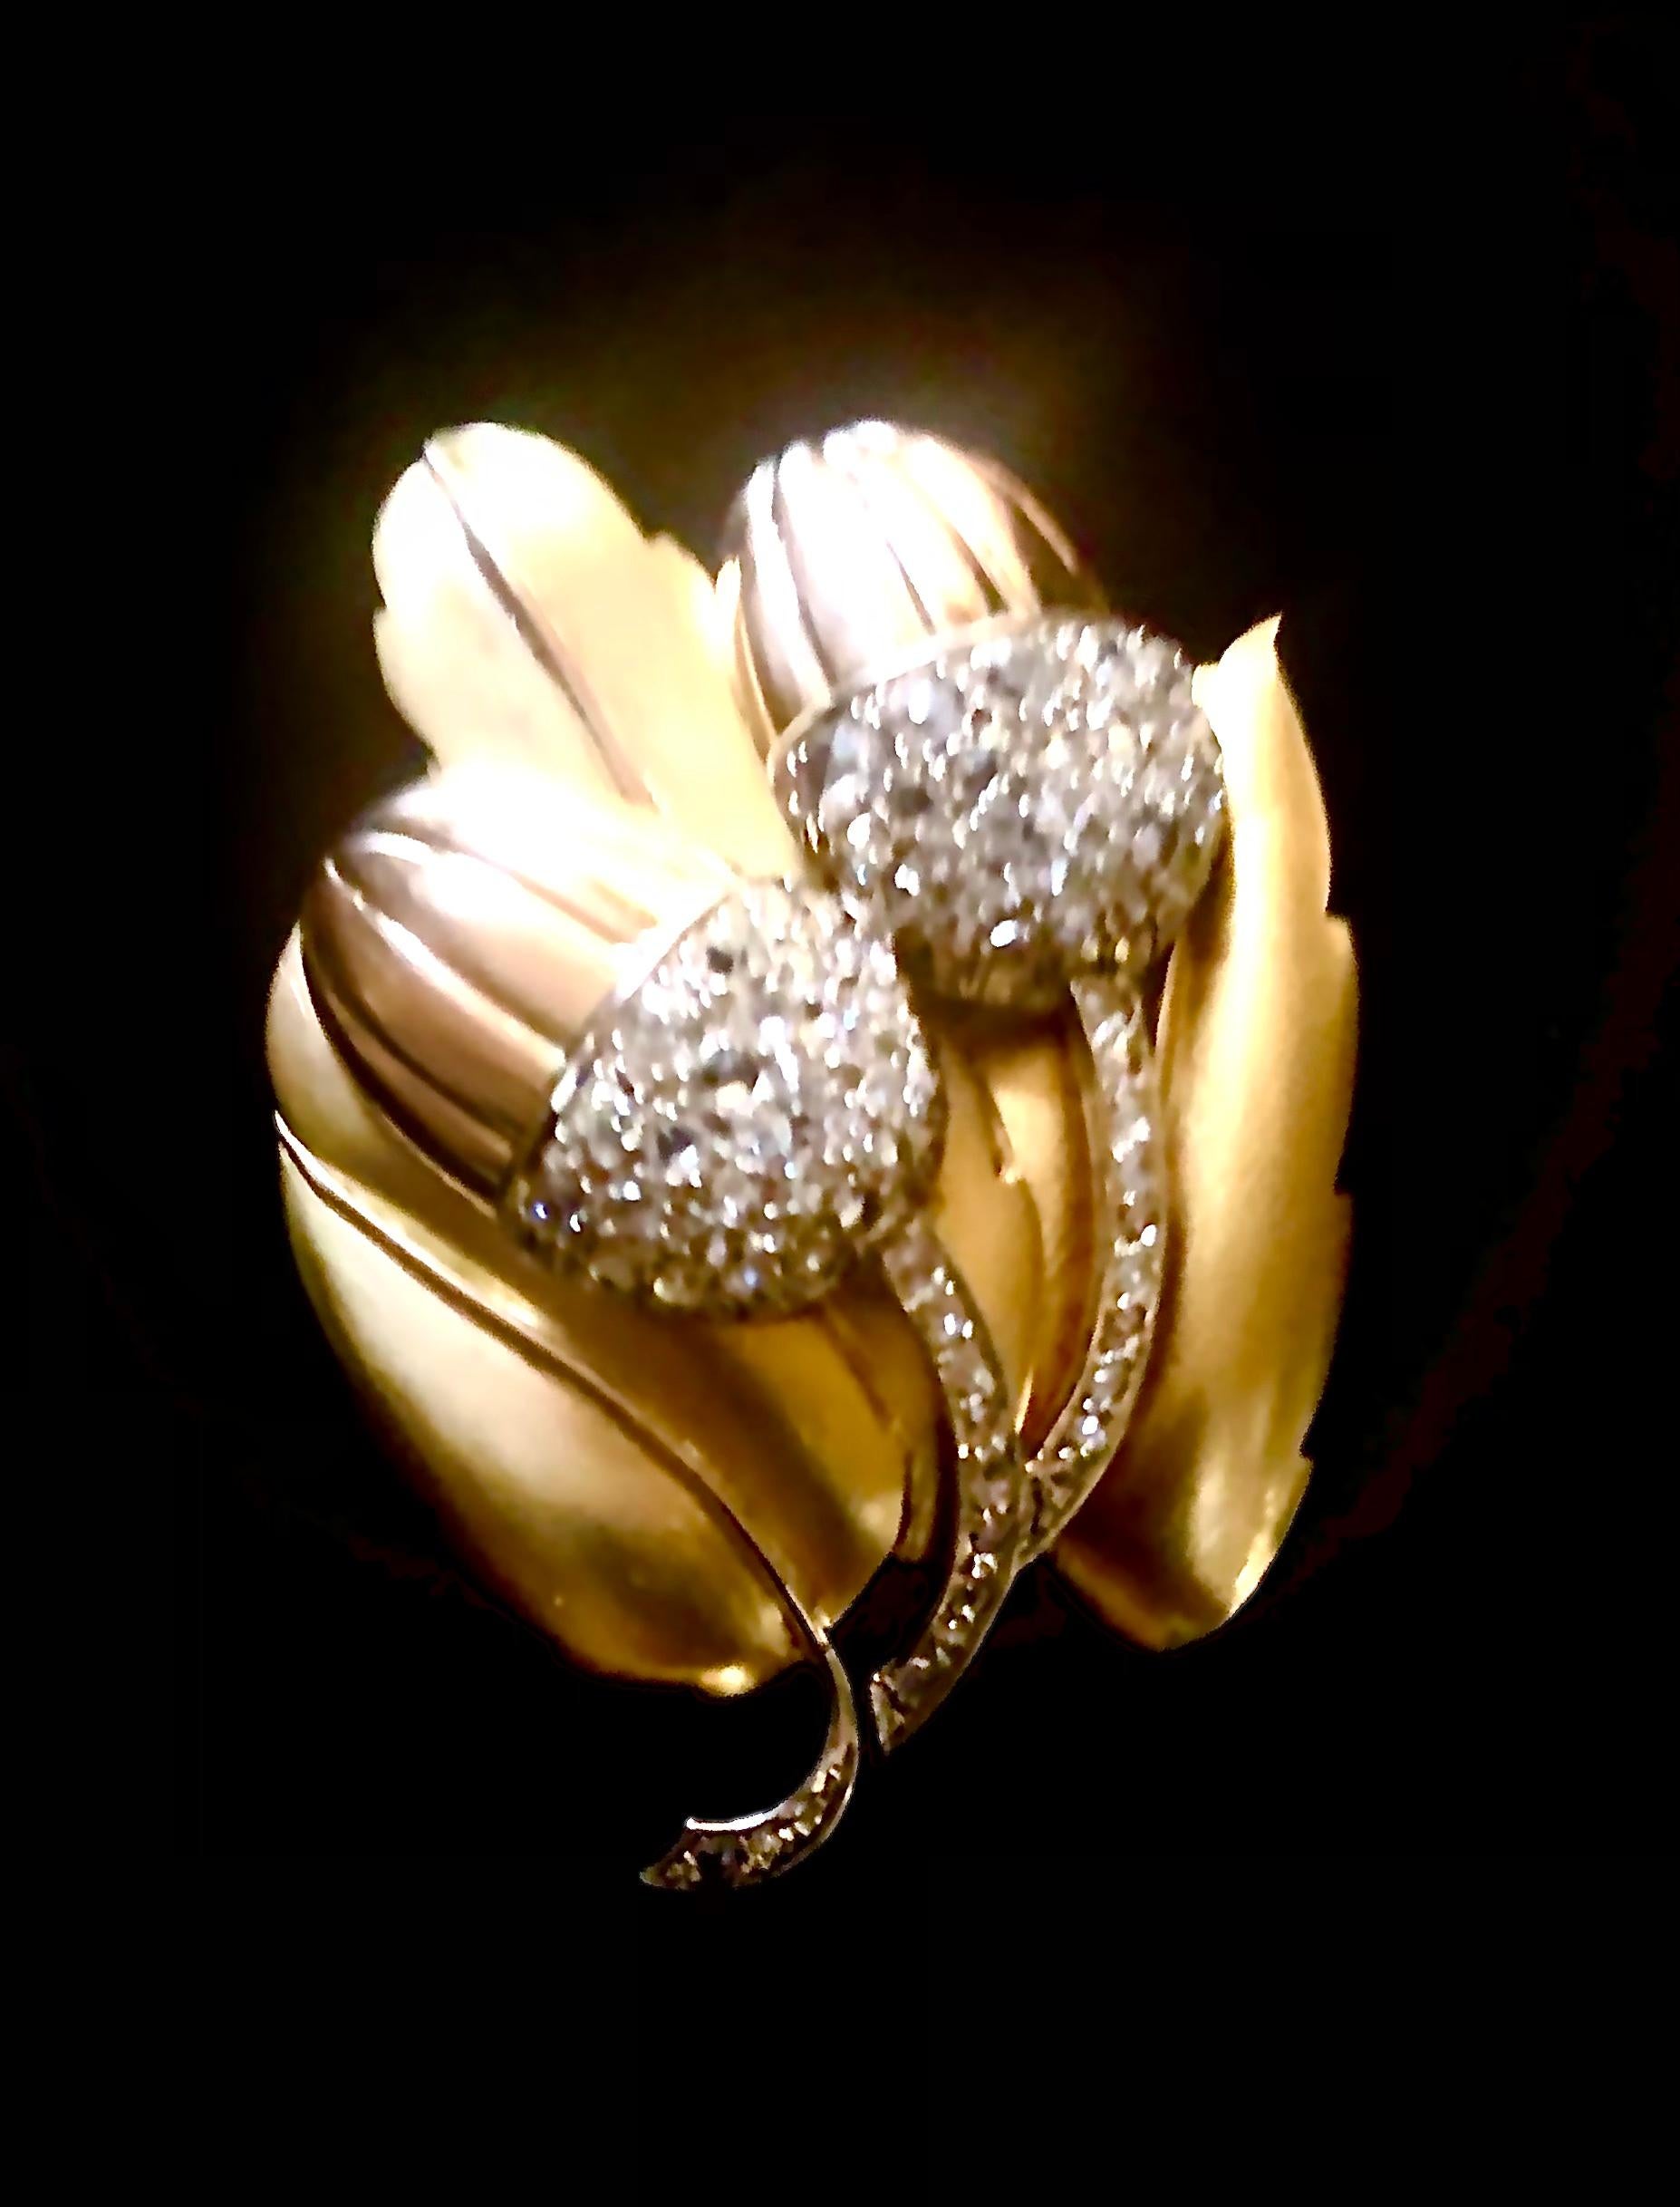 Elegant naturalist 14kt. Gold and brilliant white G-J SI-I diamonds of approximately 1.25 CTs.

The workmanship on this brooch is beautifully restrained relying elegant line and polished finishing of acorns and satin finish of leaves. And of course,